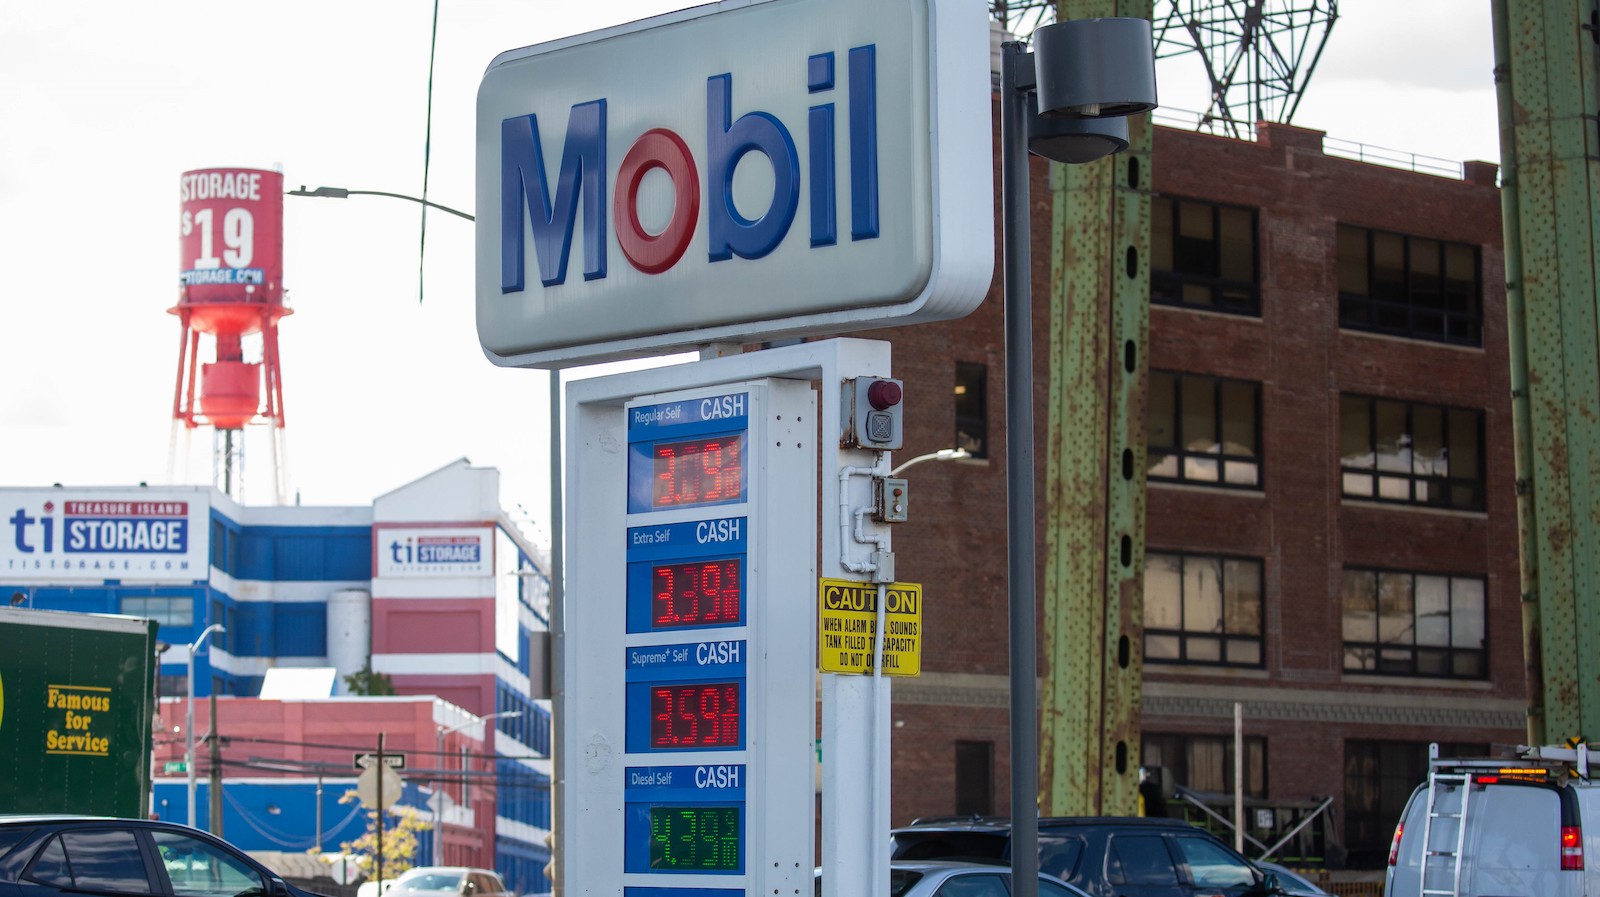 An image of a Mobil gas station sign